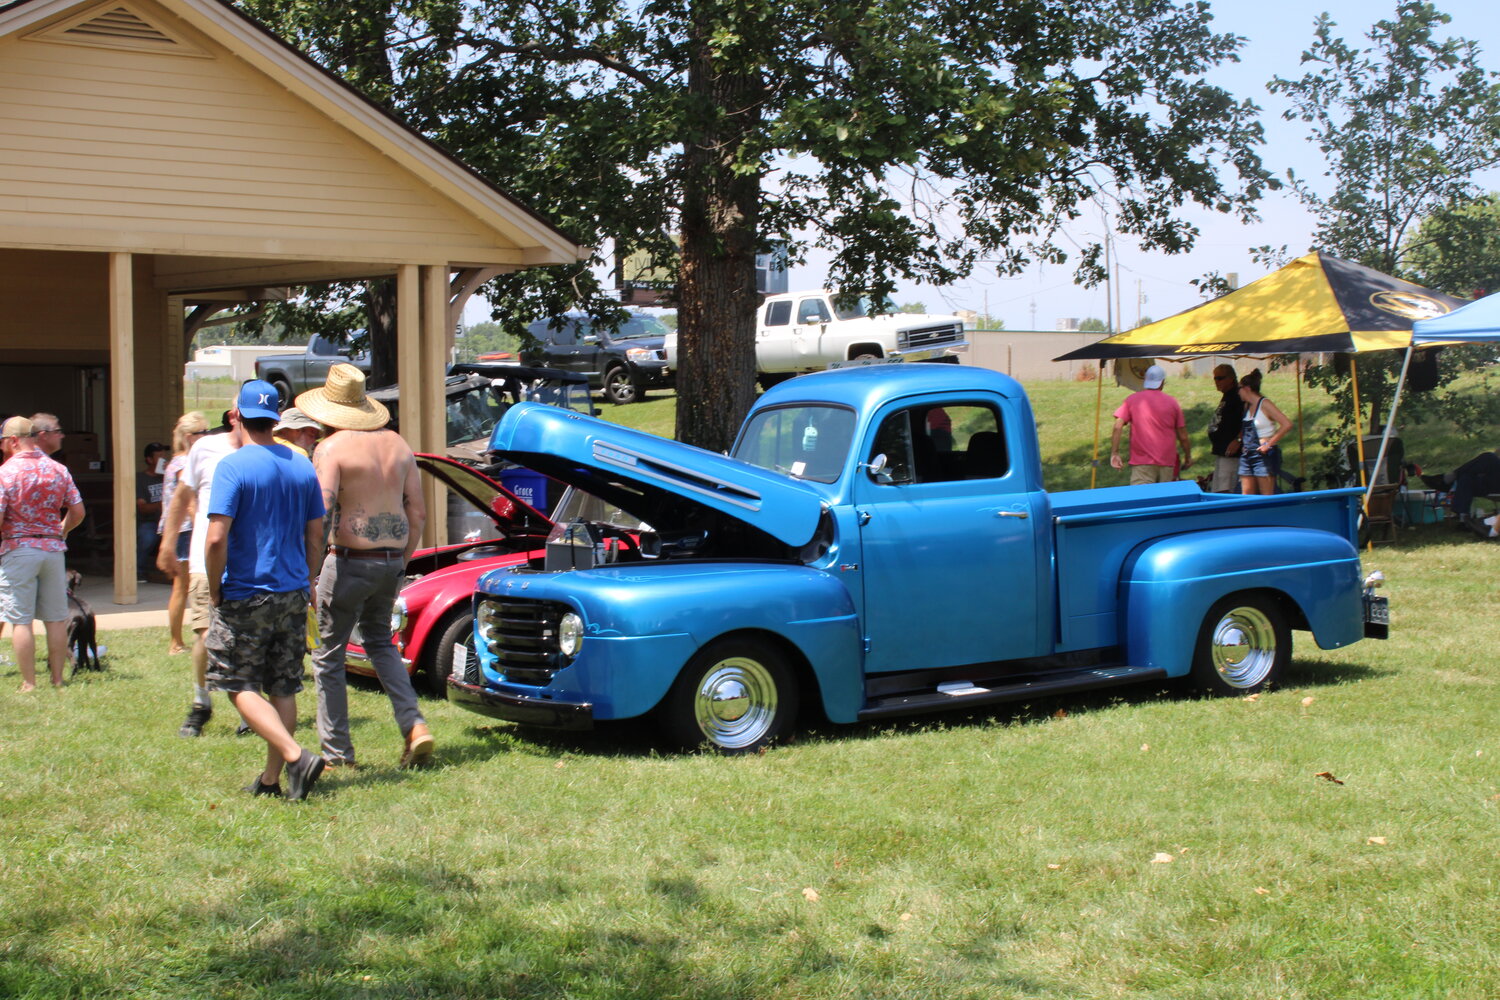 The blue truck was one of several cars on display in Diekroeger Park during the July 29 car show.